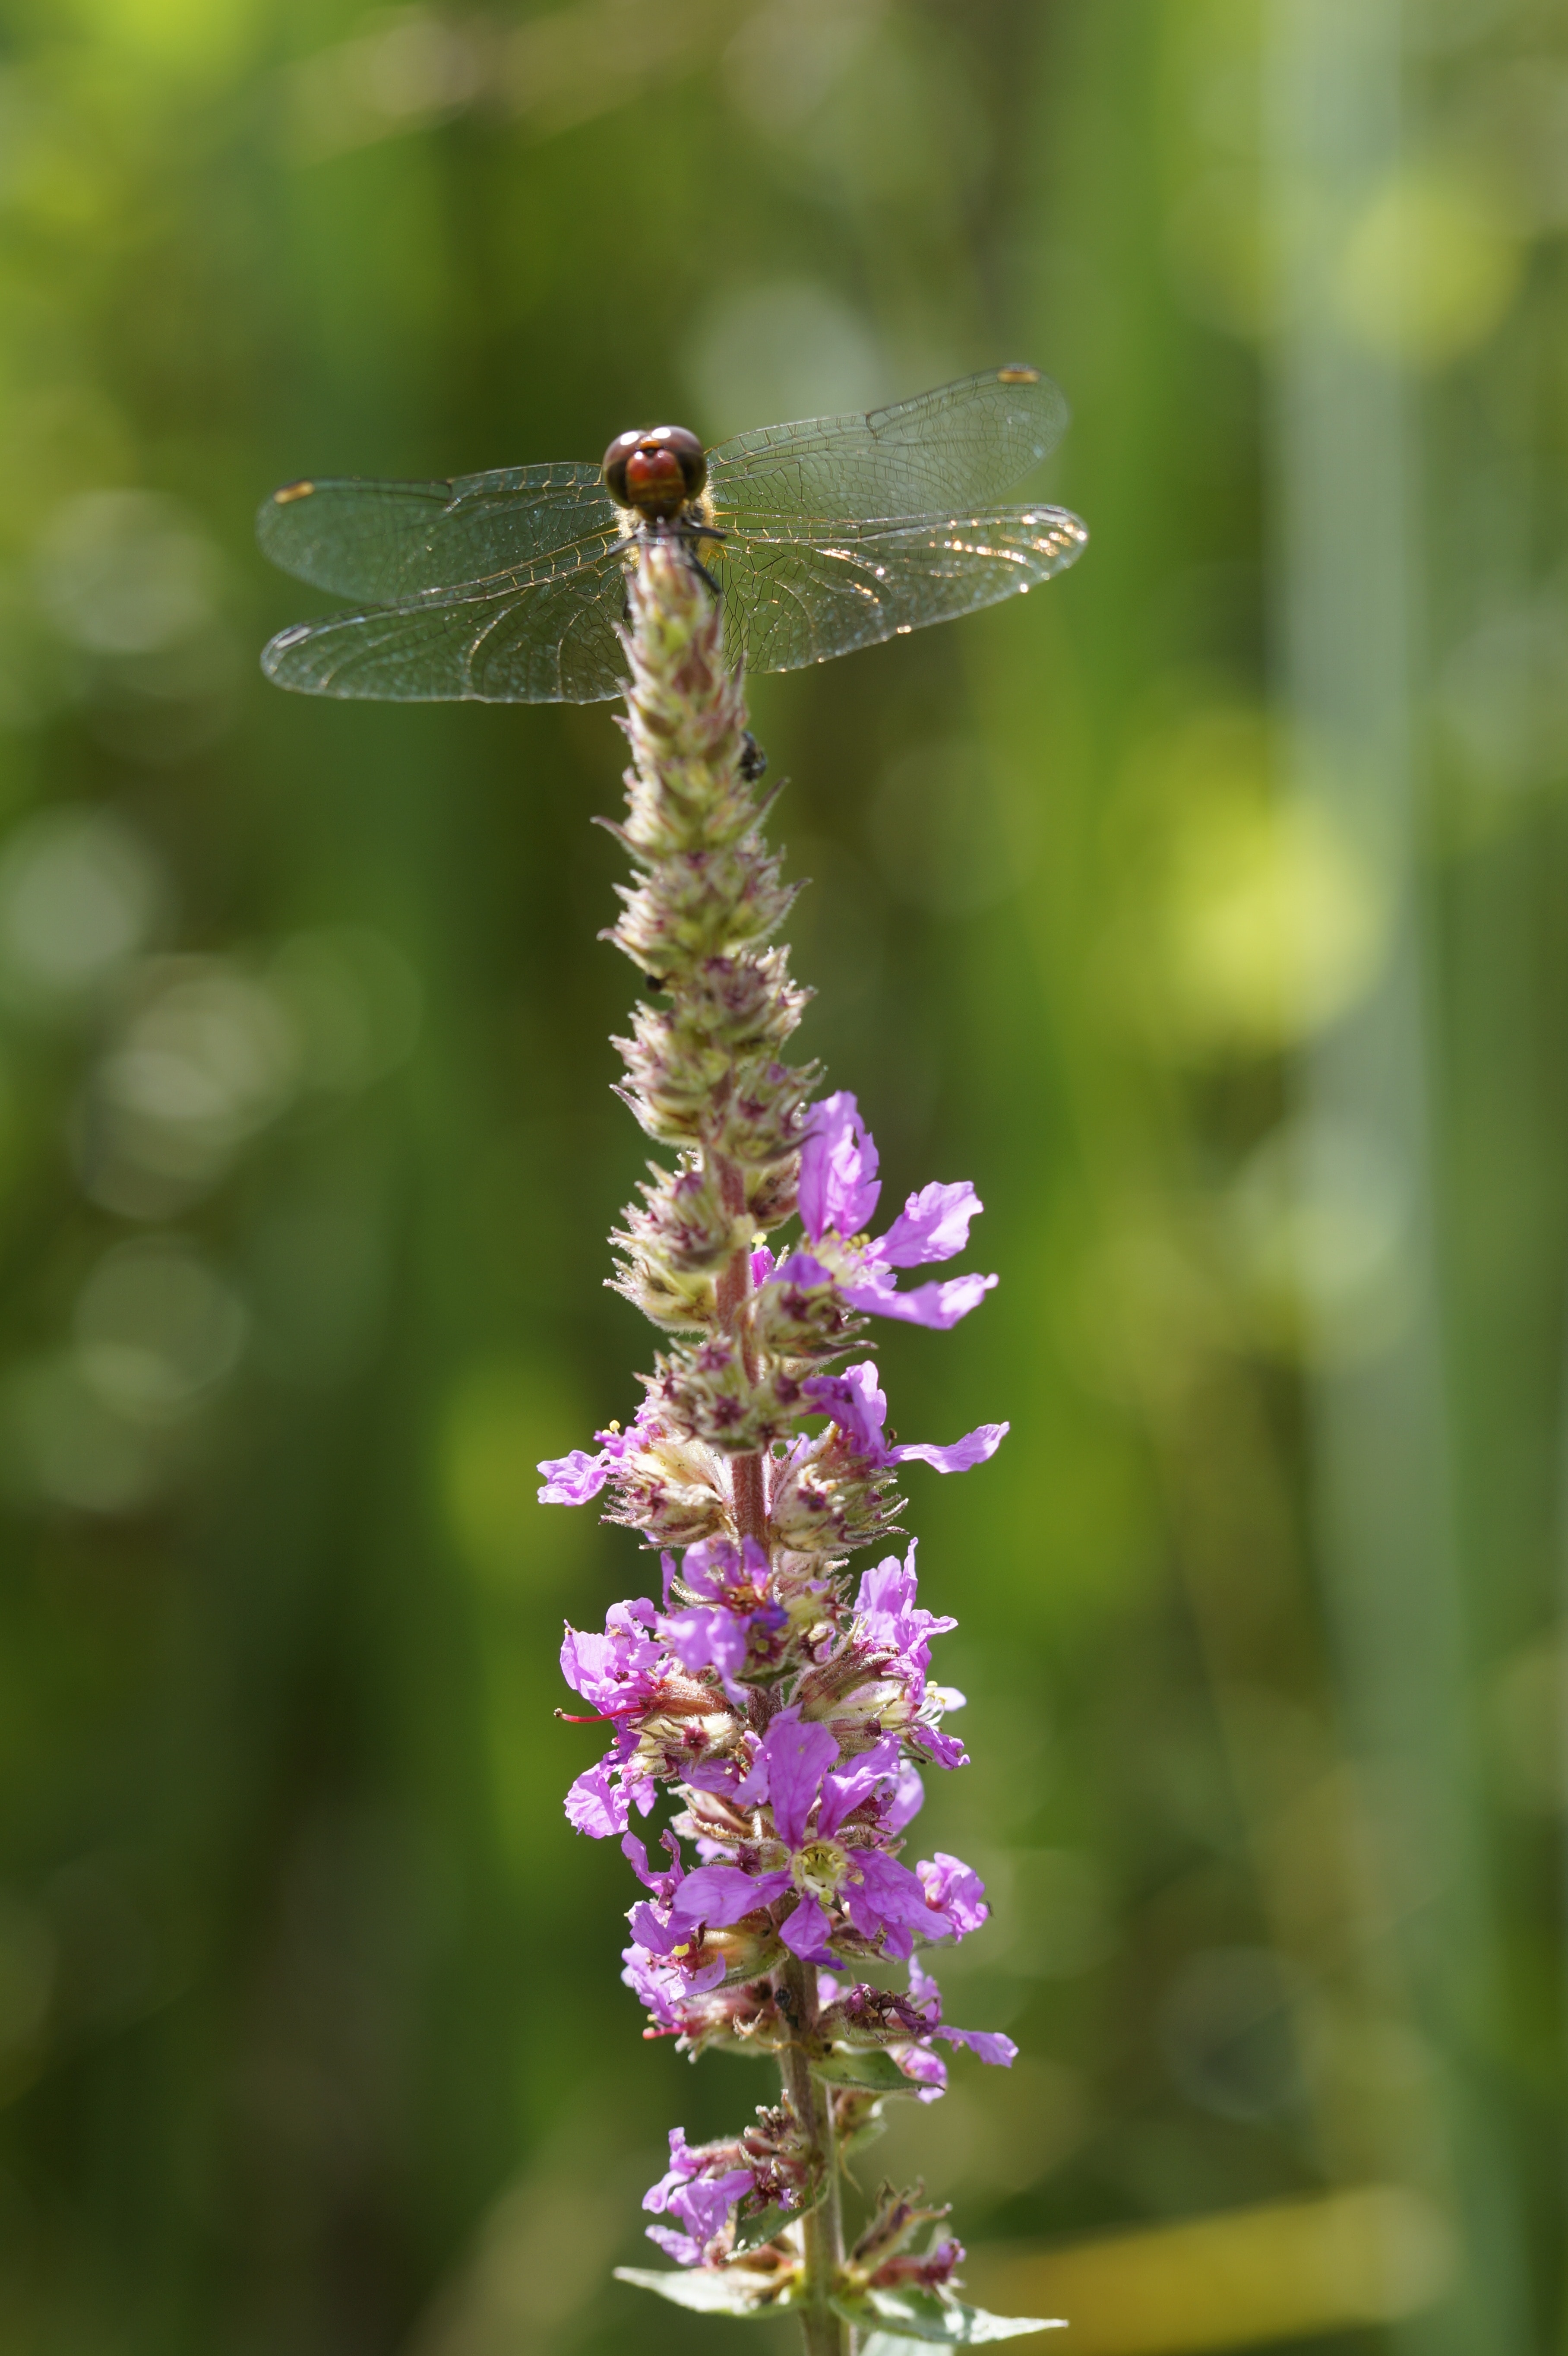 dragonfly perched on lavender flower in selective focus photography